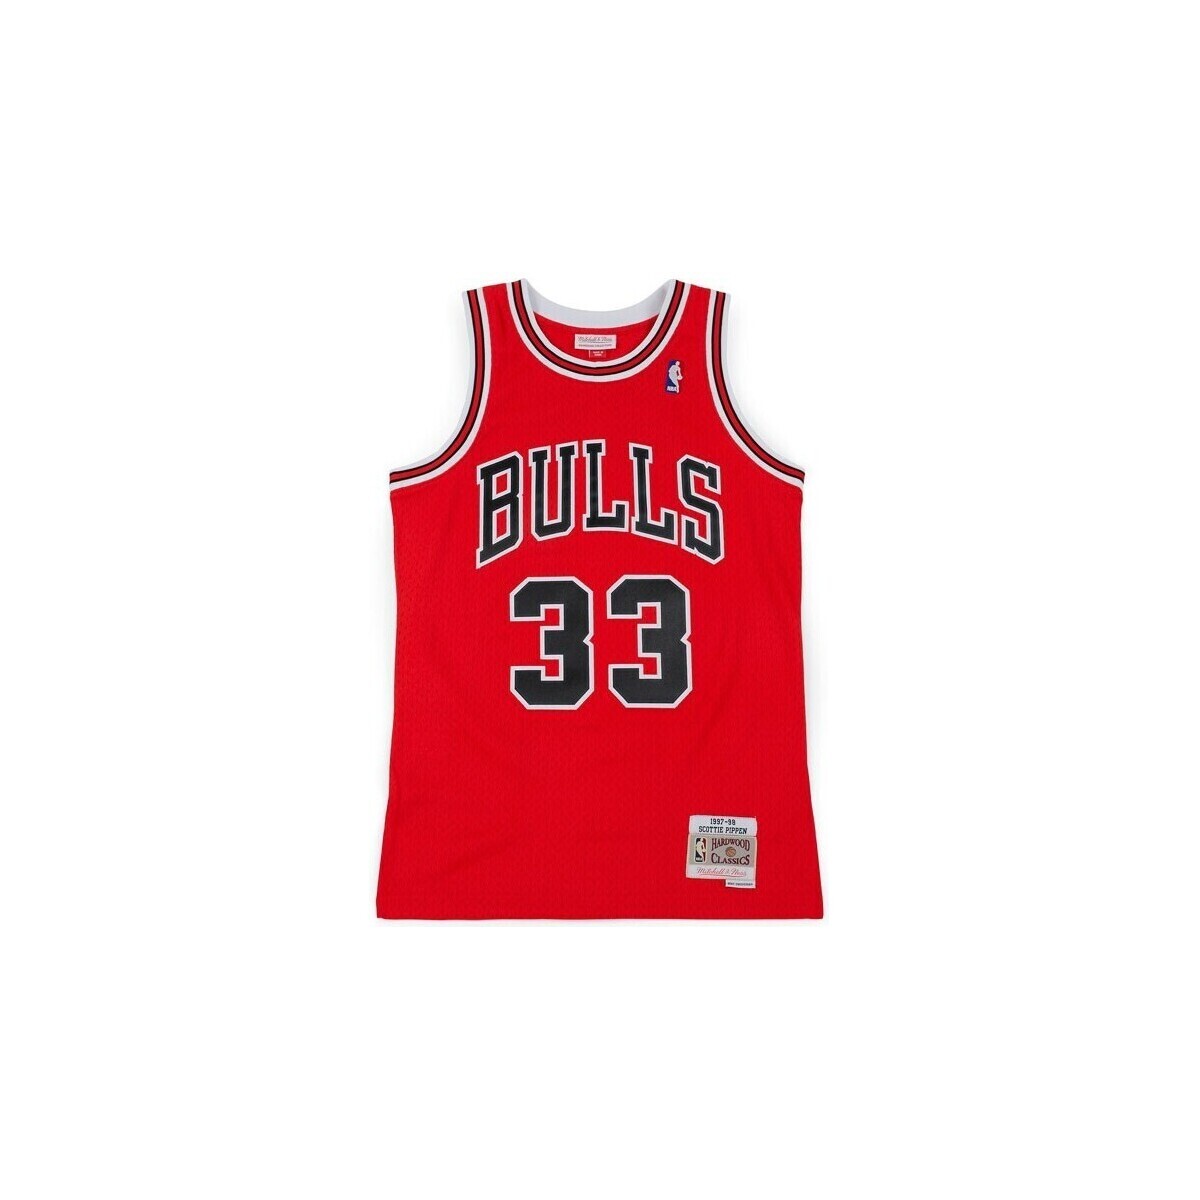 Vêtements Homme T-shirts manches courtes Mitchell And Ness  Rouge